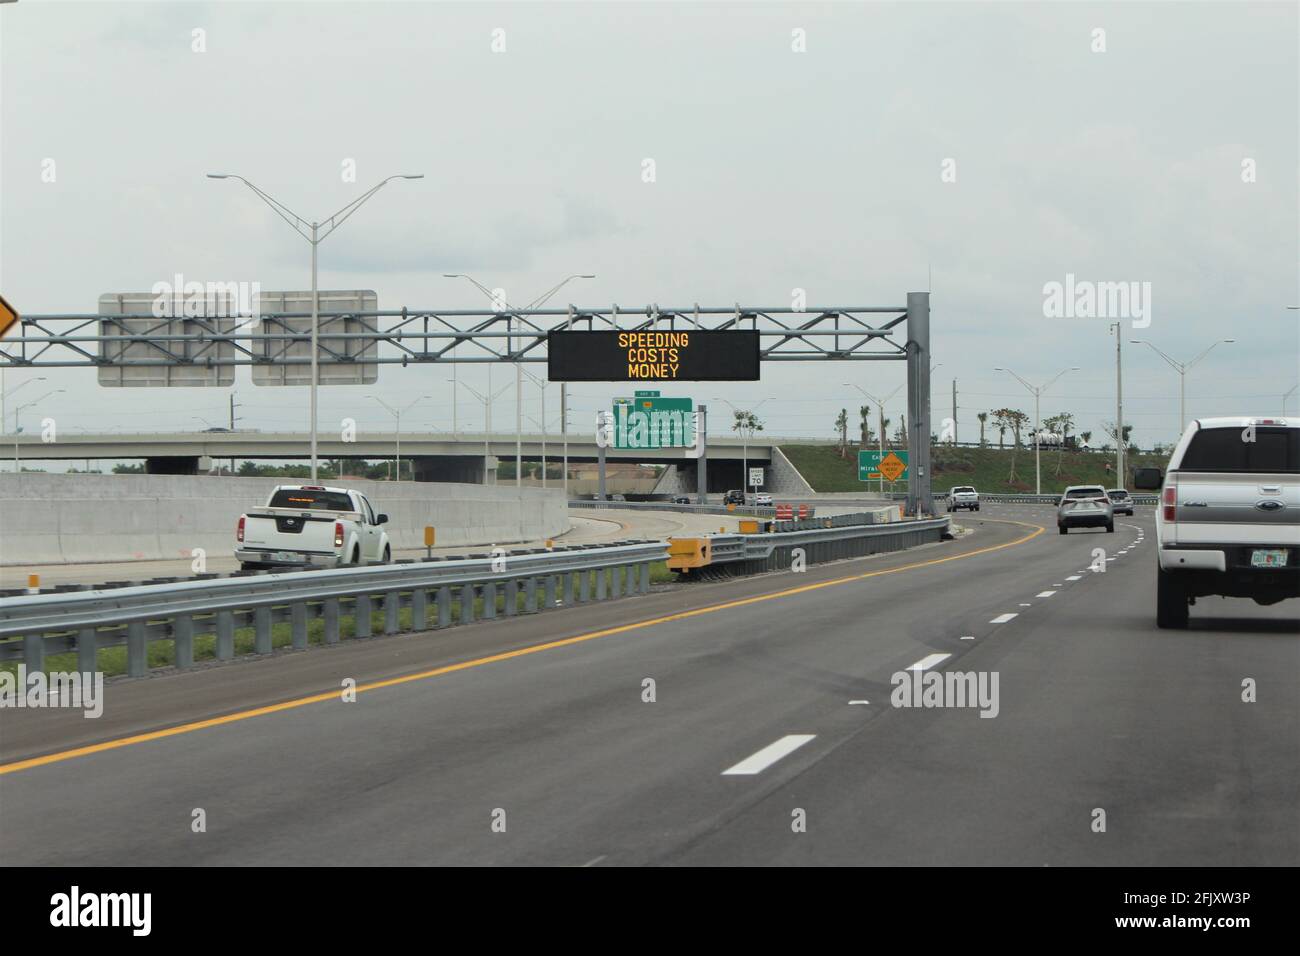 Driving through I-75 expressway on a cloudy day. Caution signs for speeding displayed. Stock Photo